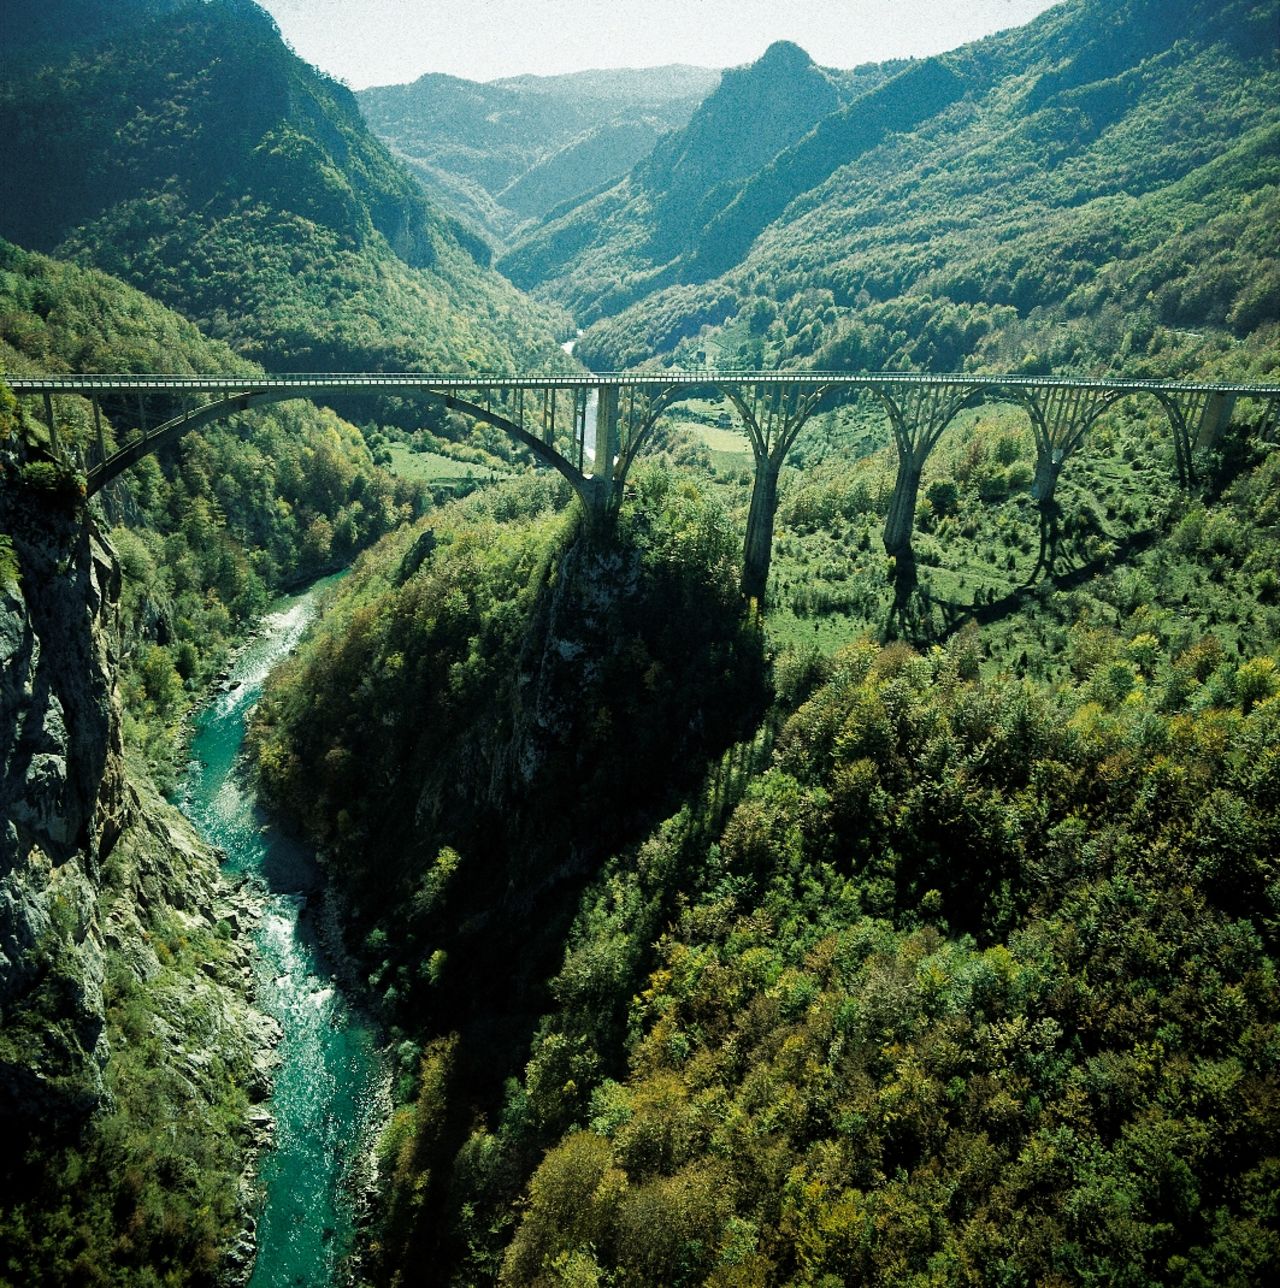 <strong>Đurđevića Tara Bridge: </strong>In the north of the country is an imposing concrete viaduct. Đurđevića Tara Bridge crosses the rushing Tara river. 